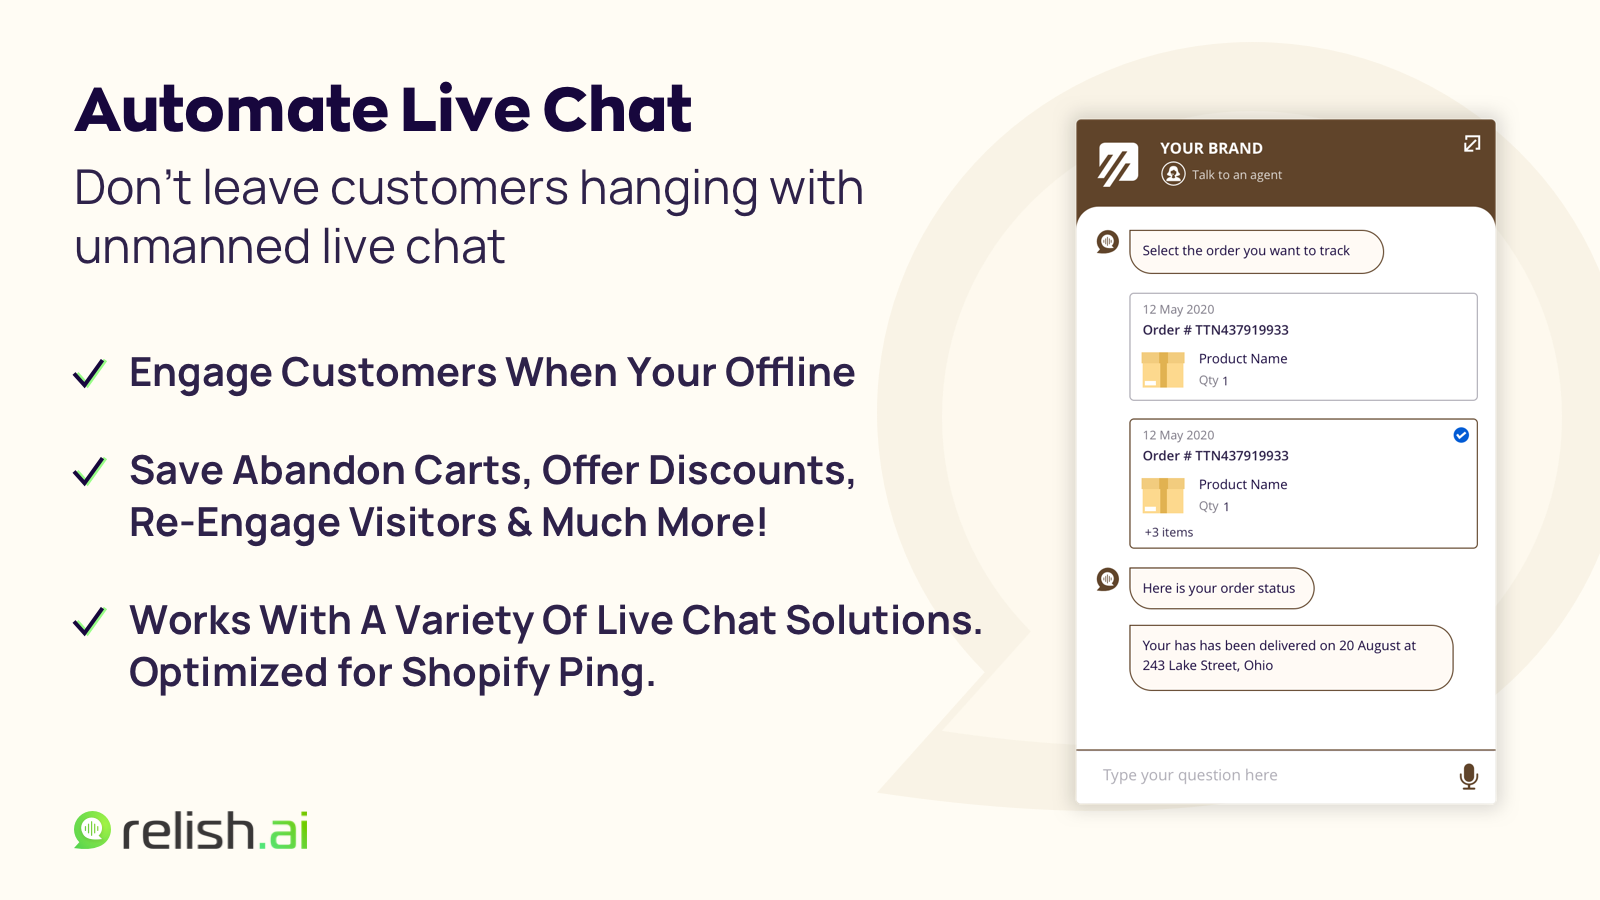 Automate Your Live Chat Solution - Don’t leave customers hanging with unmanned live chat support solutions and away messages. Engage customers when your offline with a ready-to-use chatbot. Optimized for Shopify Ping!